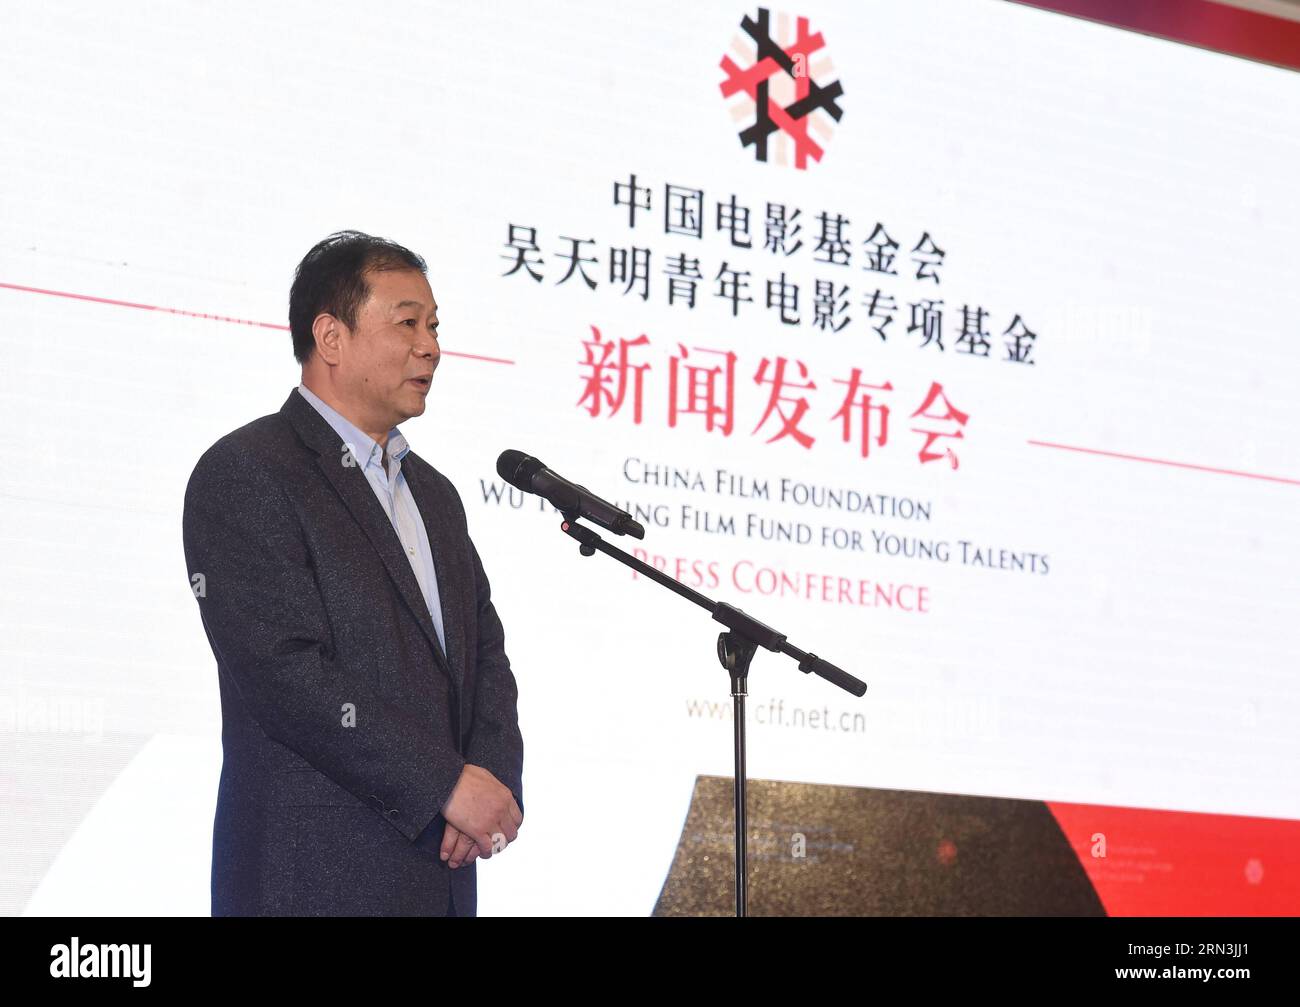 (150419) -- BEIJING, April 19, 2015 -- Zhang Pimin, president of the China Film Foundation, addresses a press conference of China Film Foundation Wu Tianming Film Fund for Young Talents during the fifth Beijing International Film Festival (BJIFF) in Beijing, capital of China, April 19, 2015. Wu Tianming was a leading figure of China s Fourth Generation film directors. His major works include Old Well and Life . ) (wjq) CHINA-BEIJING-FILM FESTIVAL-WU TIANMING FILM FUND-CONFERENCE (CN) LuoxXiaoguang PUBLICATIONxNOTxINxCHN   Beijing April 19 2015 Zhang Pimin President of The China Film Foundation Stock Photo